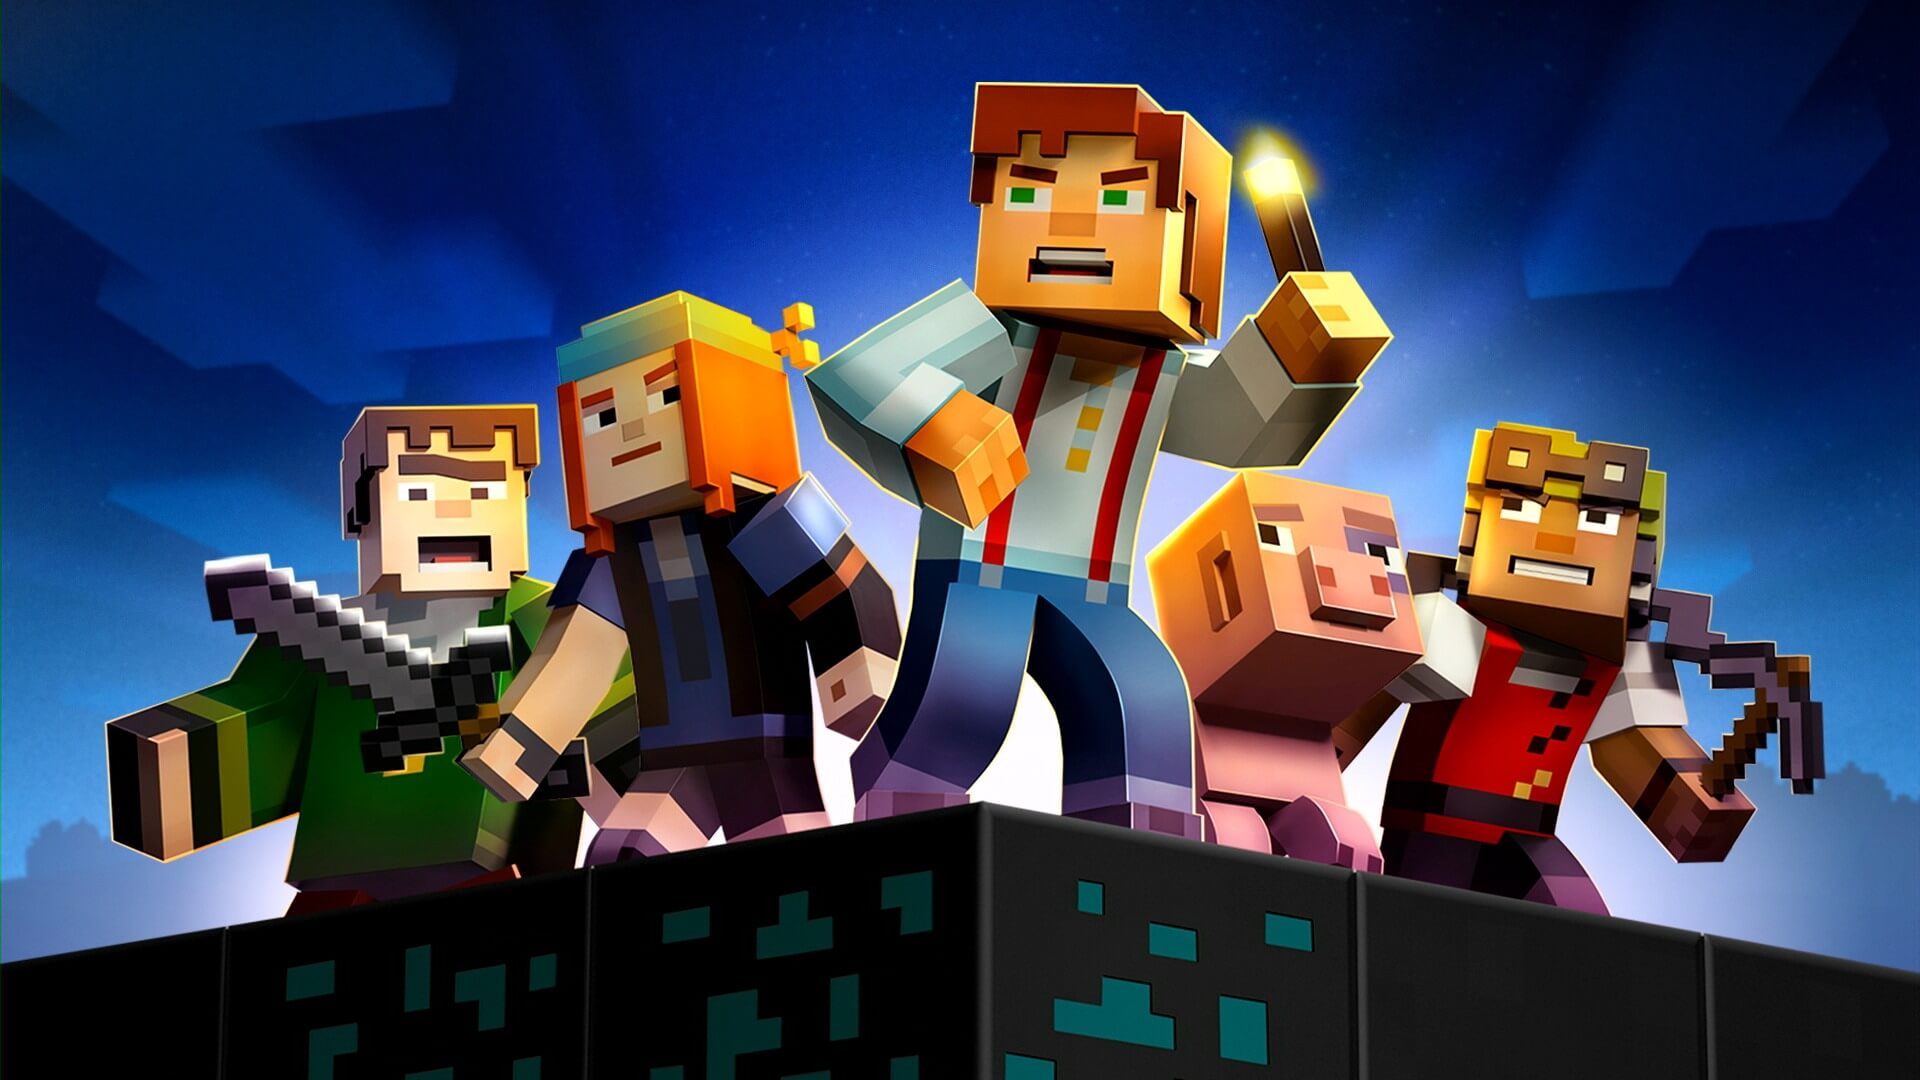 Minecraft: Story Mode - Season Two - Episode 1 - Launch Trailer 